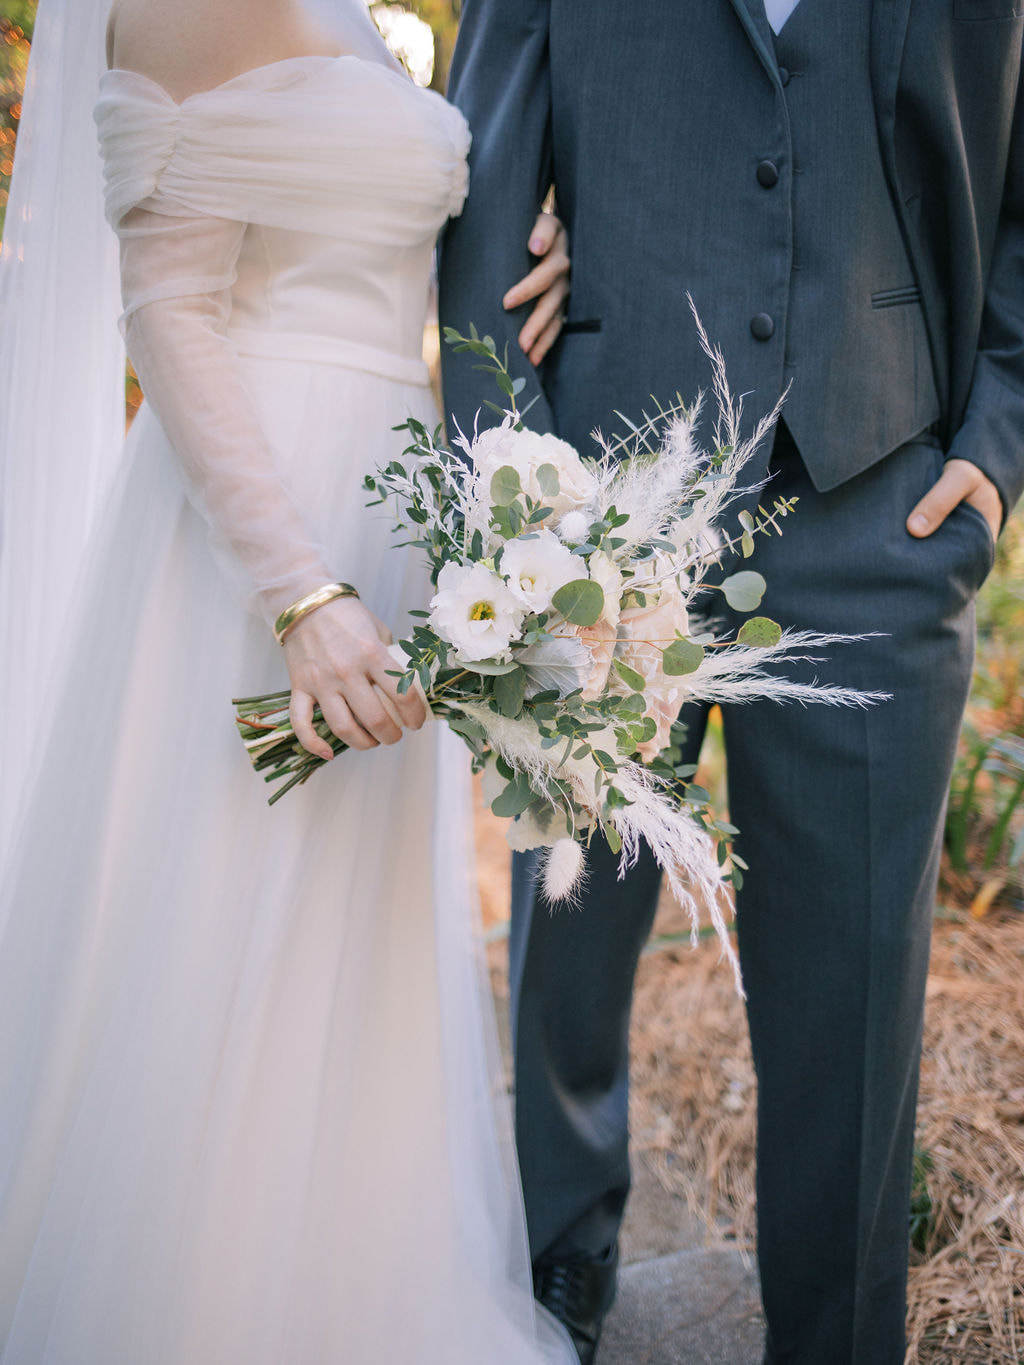 detail photo of bride and groom posing together, showing of bride's bouquet and gold bracelet